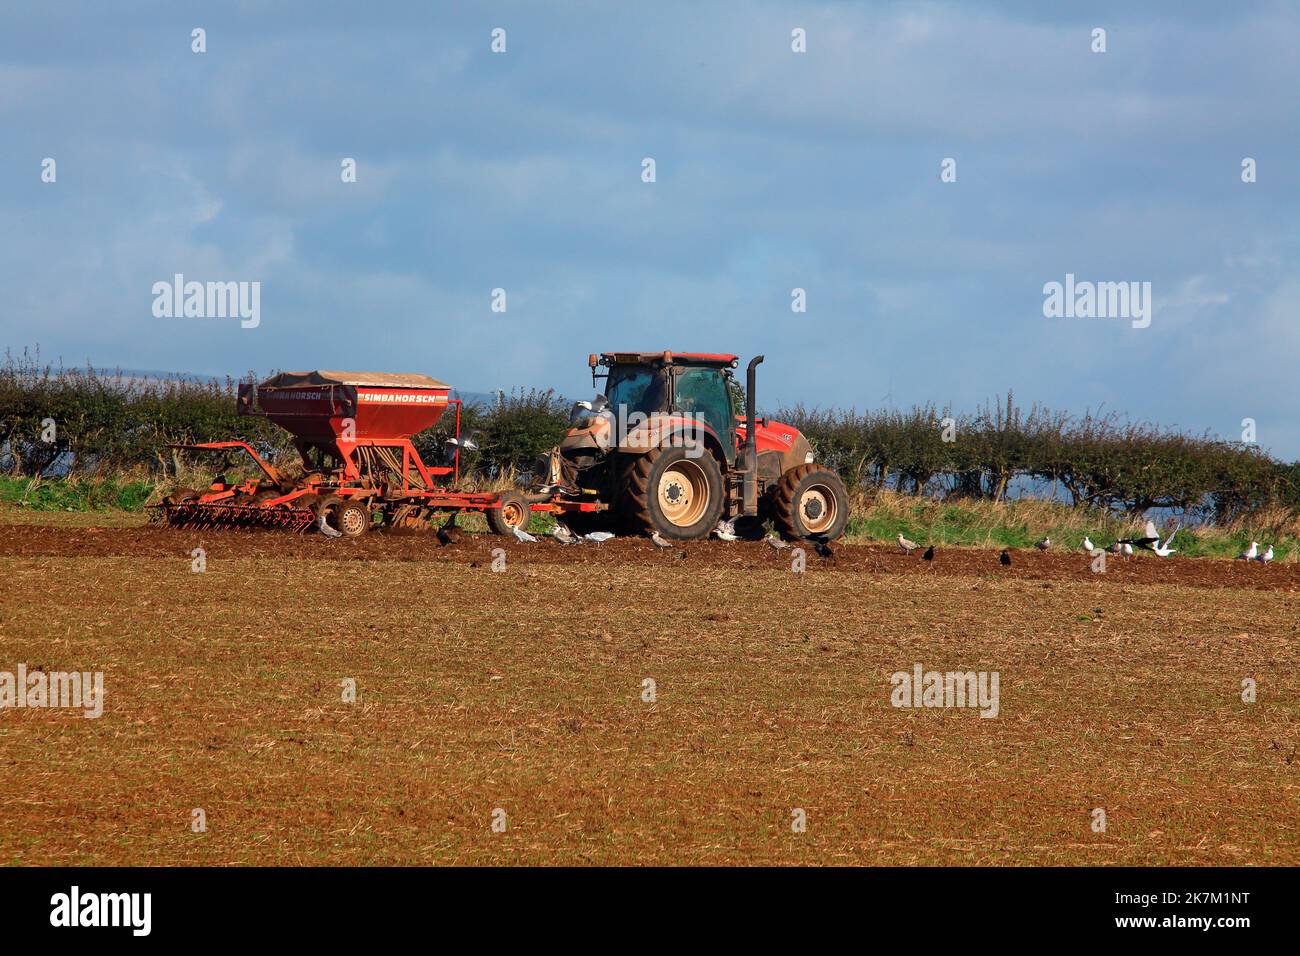 A local farmer out on his Tractor towing am automatic seeding machine for the next crop in this recently ploughed field. Stock Photo